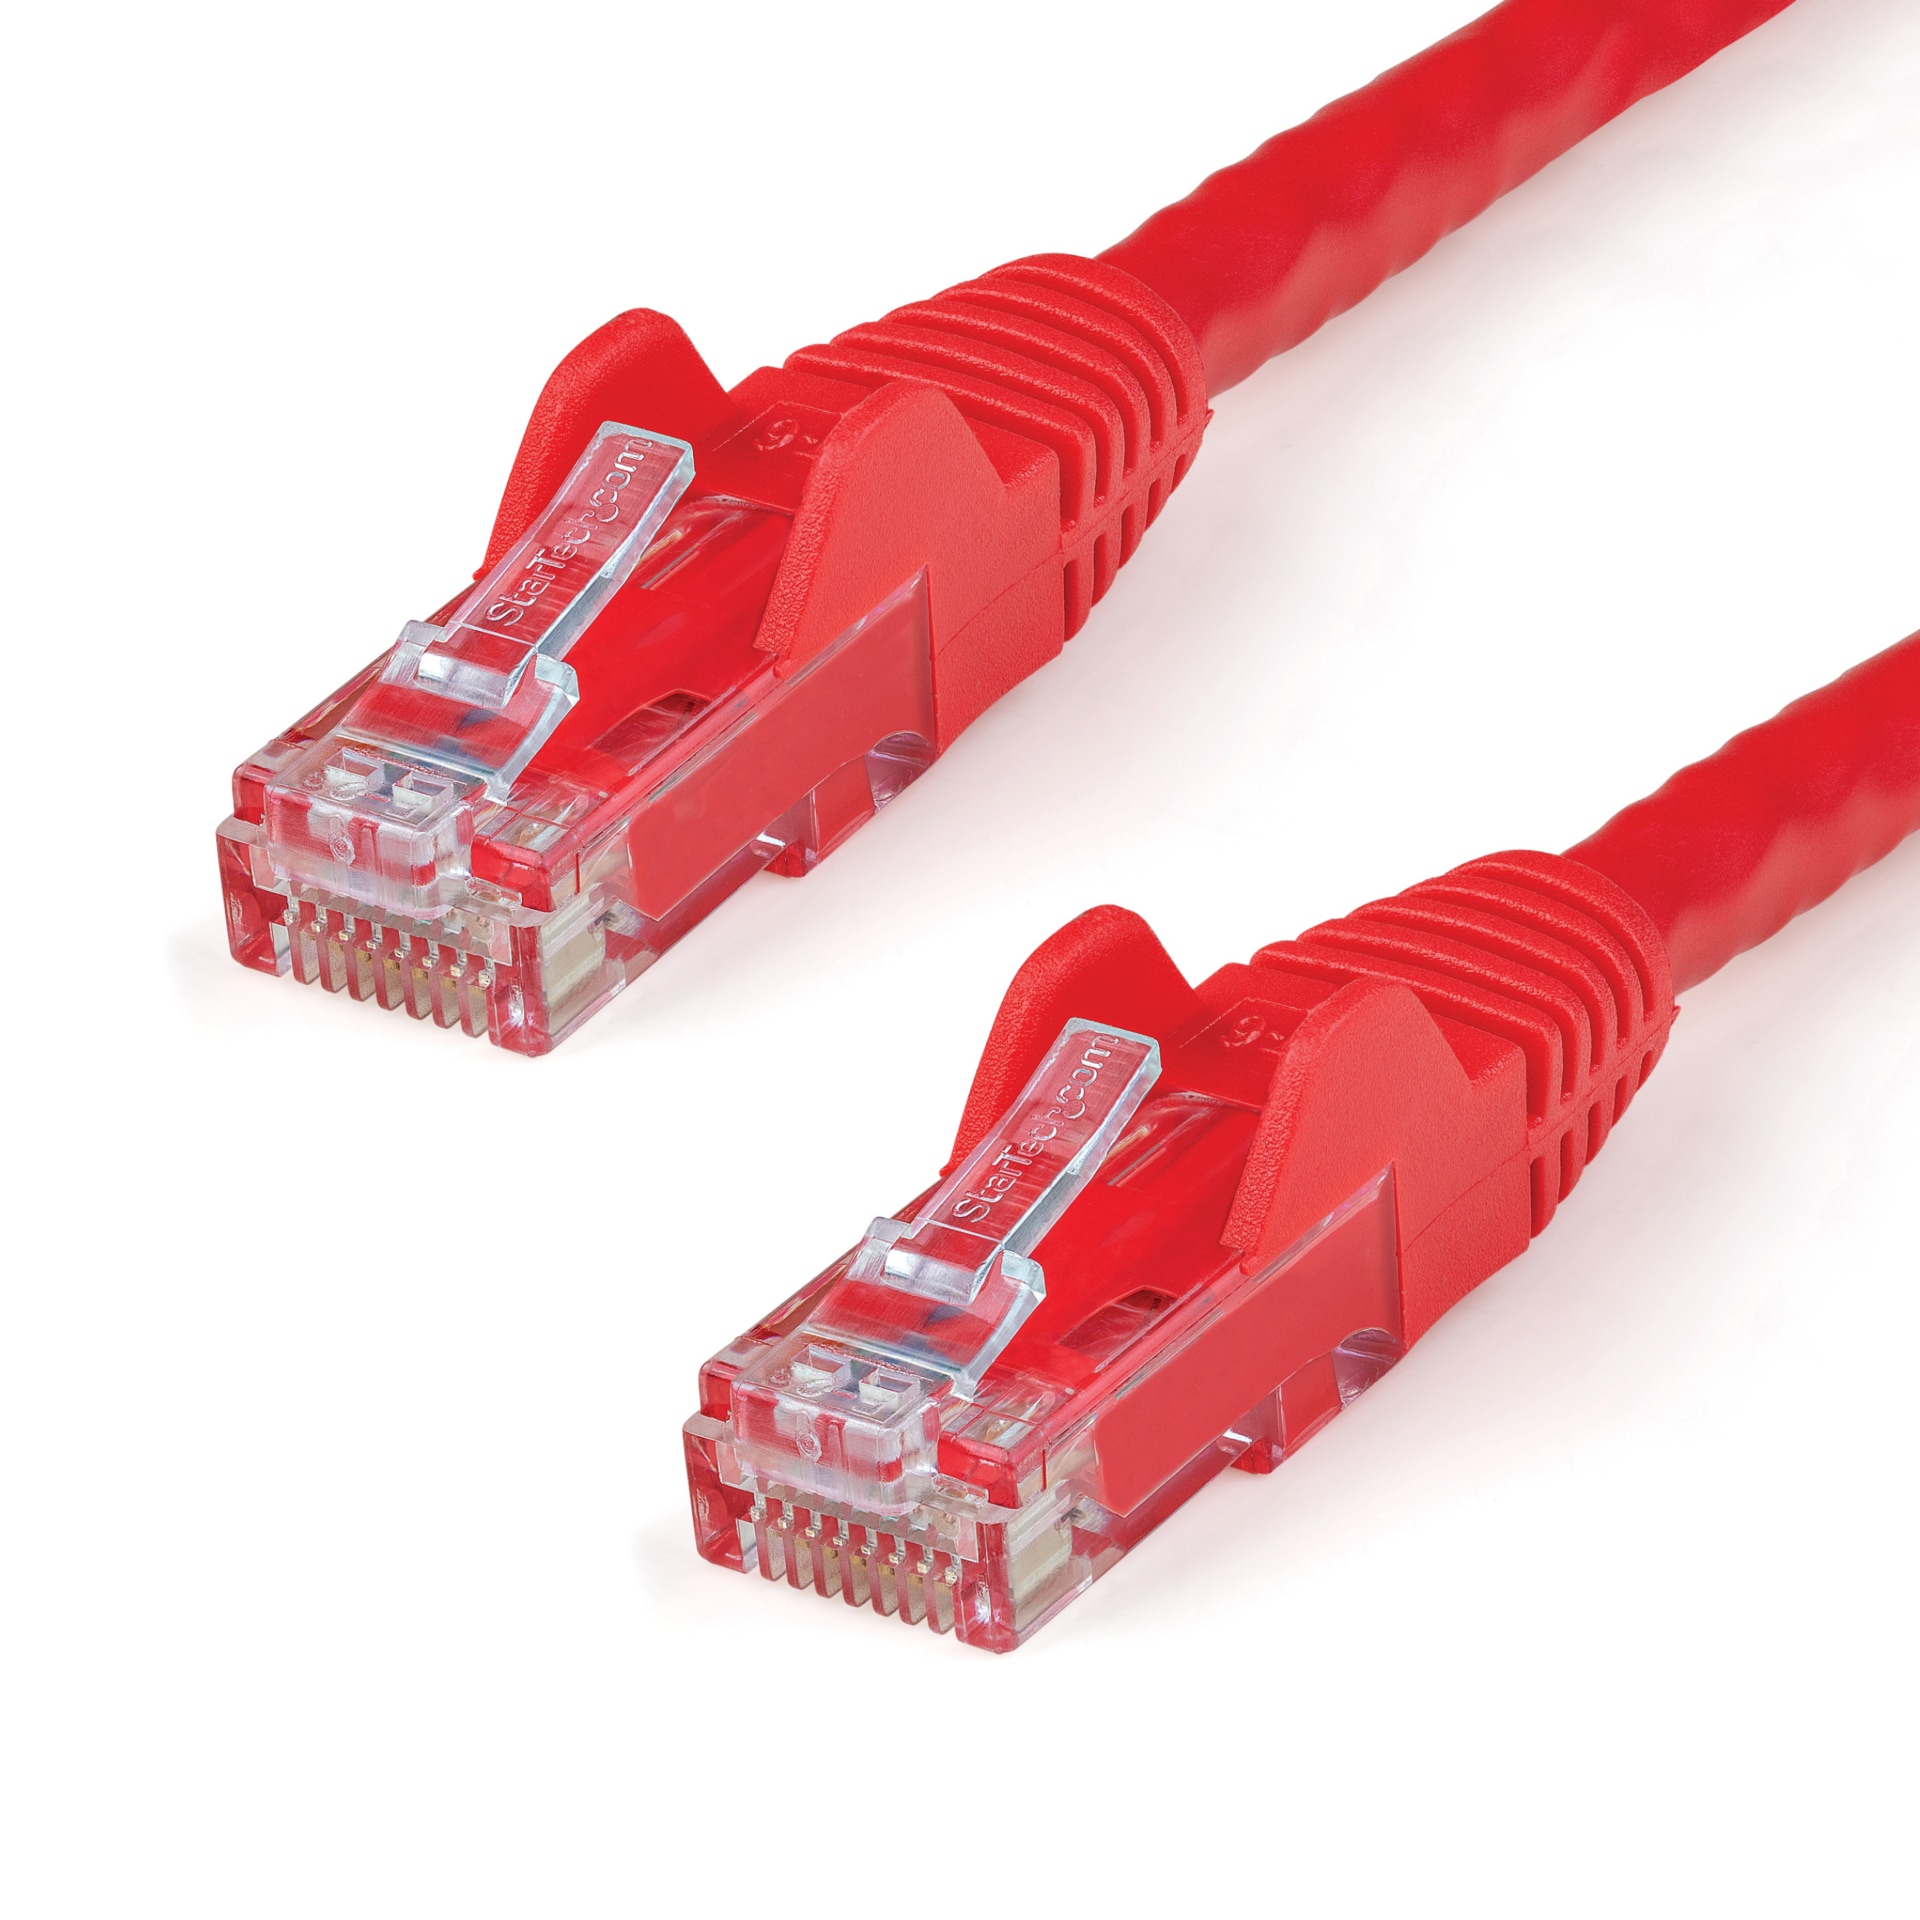 StarTech.com CAT6 Ethernet Cable 25' Red 650MHz CAT 6 Snagless Patch Cord